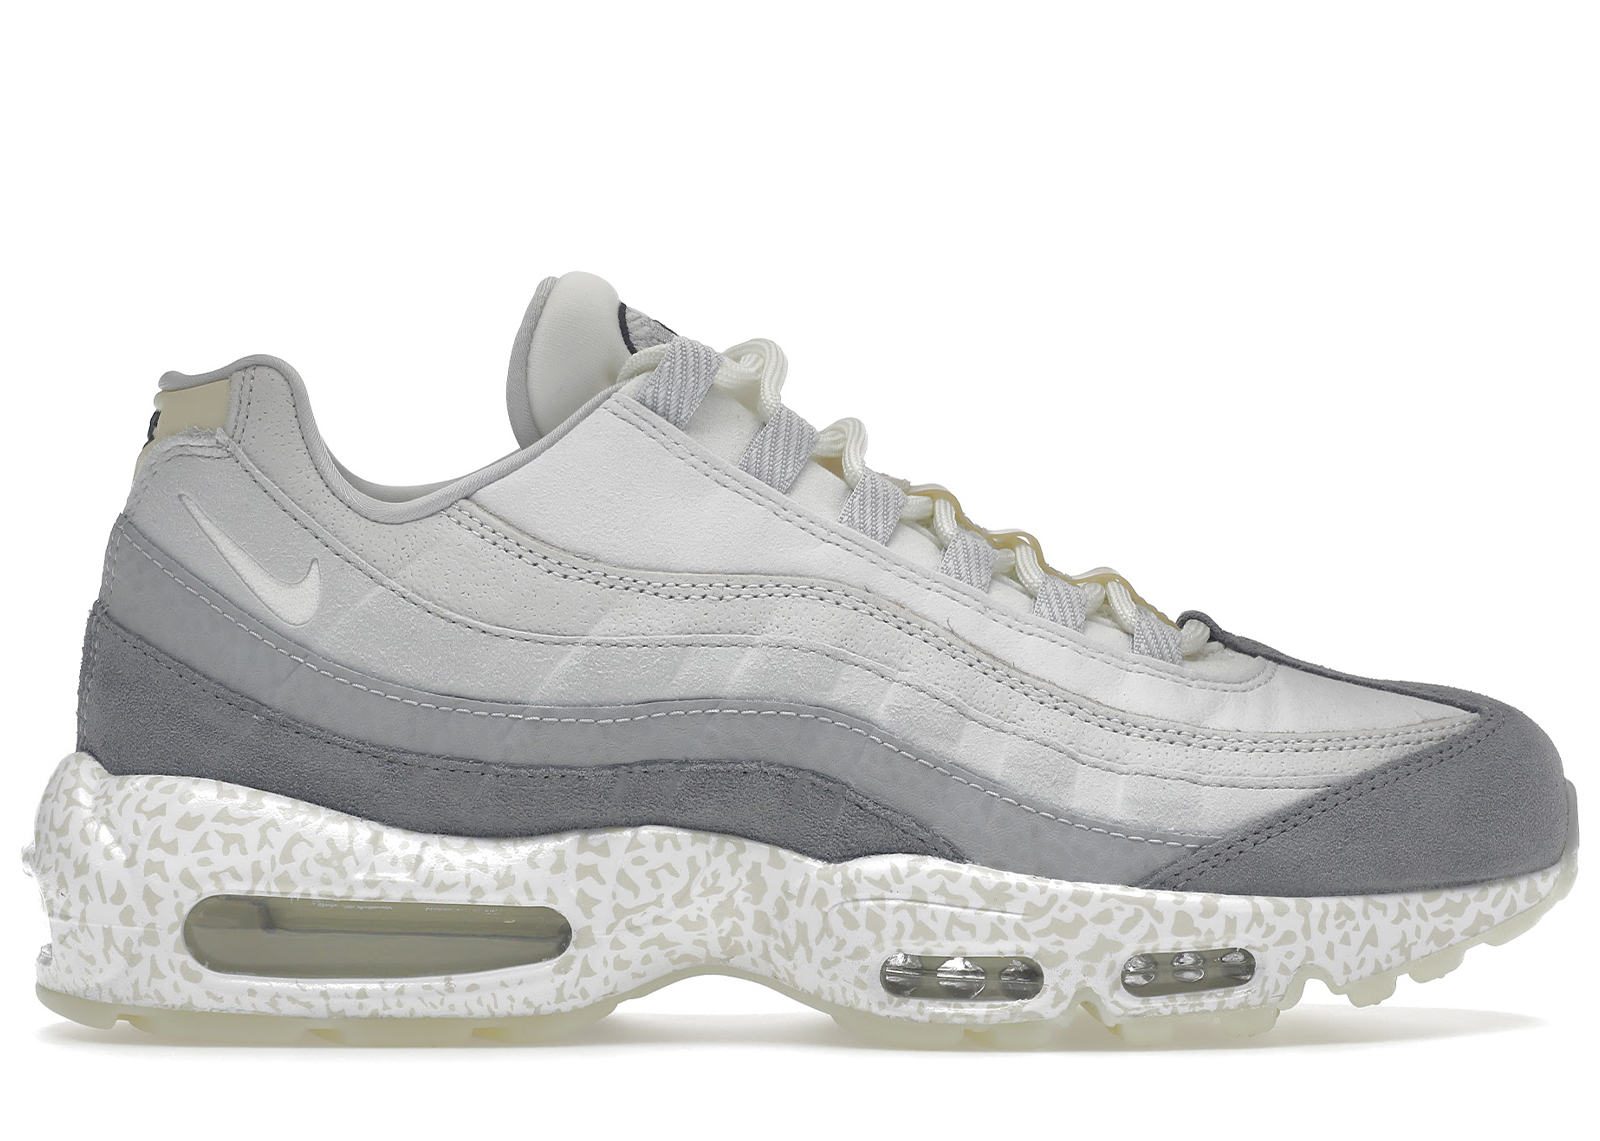 Nike Air Max 95 Shoes - Release Date